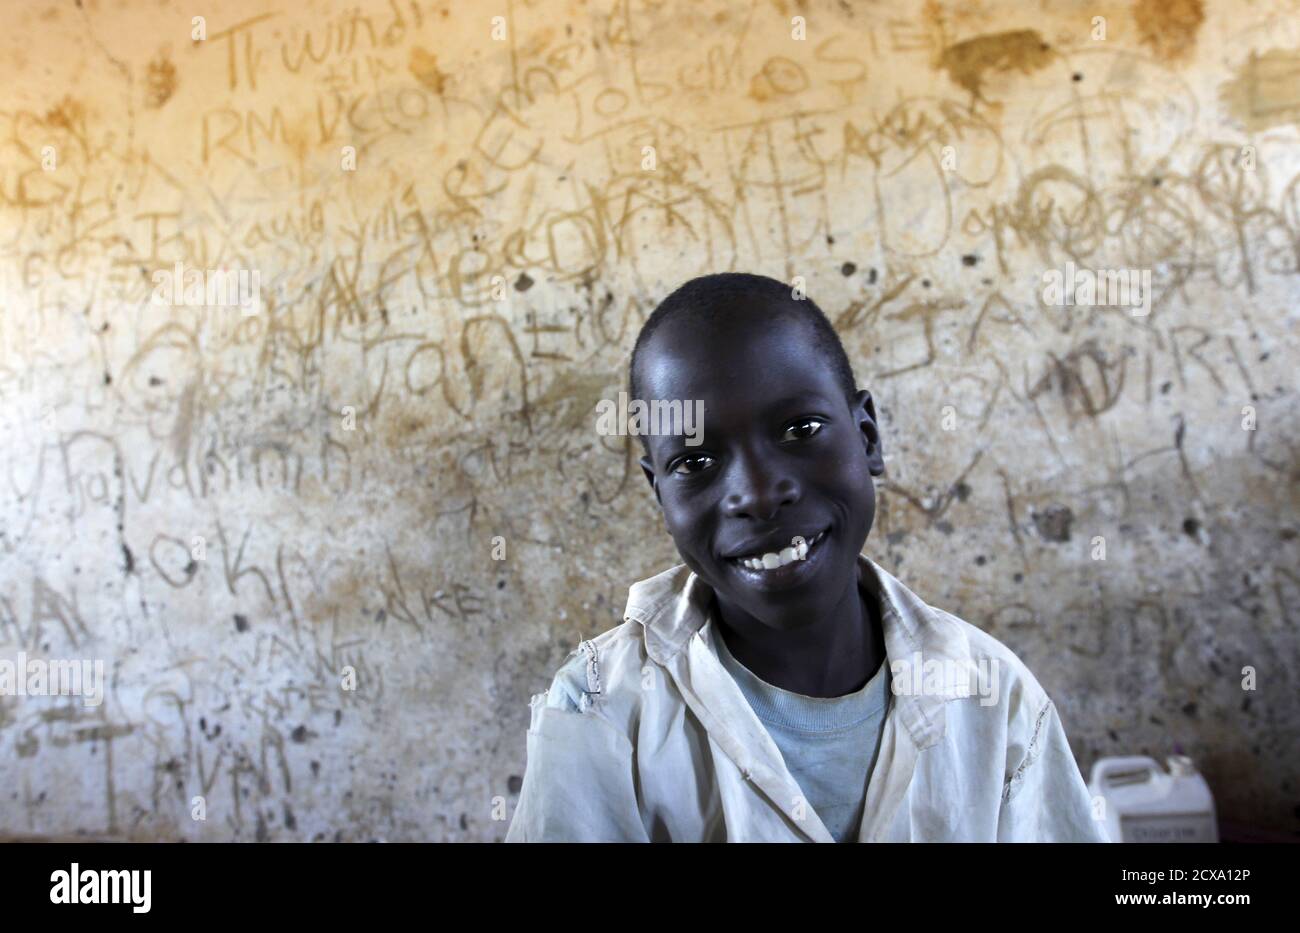 A pupil smiles as he attends a class session at the Senator Obama primary school in the U.S. President Barack Obama's ancestral village of Nyang'oma Kogelo, west of Kenya's capital Nairobi, July 16, 2015. President Obama visits Kenya and Ethiopia in July, his third major trip to Sub-Saharan Africa after travelling to Ghana in 2009 and to Tanzania, Senegal and South Africa in 2011. He has also visited Egypt, in North Africa, and South Africa for Nelson Mandela's funeral. Obama will be welcomed by a continent that had expected closer attention from a man they claim as their son, a sentiment felt Stock Photo